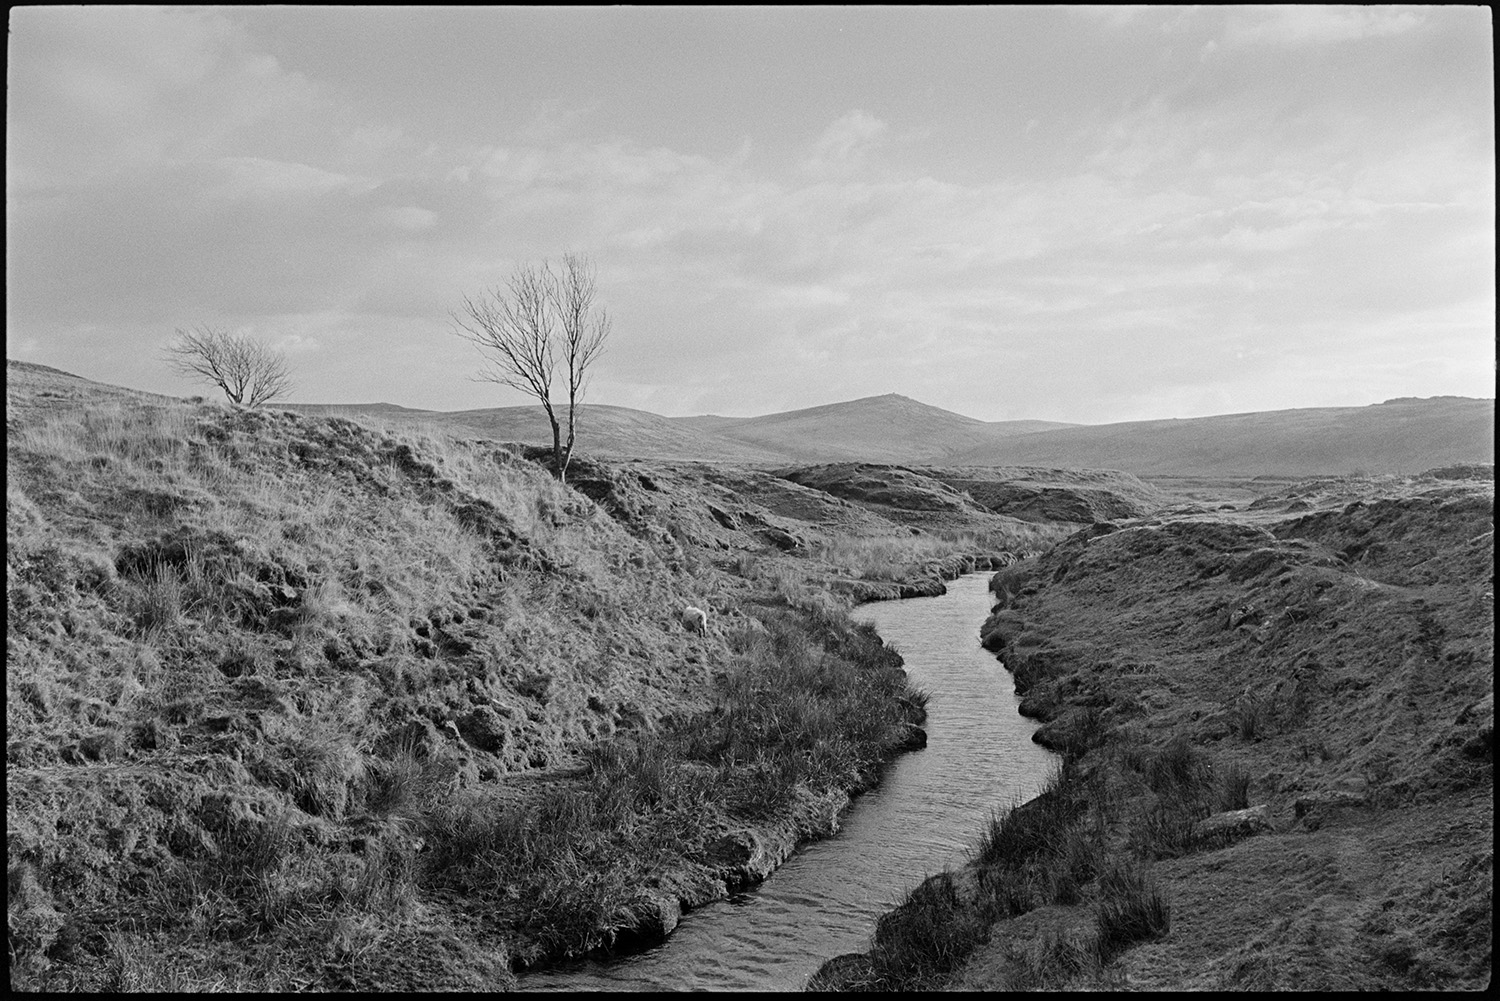 Near the source of the Taw above Belstone.
[River Taw  near its source above Belstone, Dartmoor. A sheep is grazing on the bank and in the background there is a view across Dartmoor.]